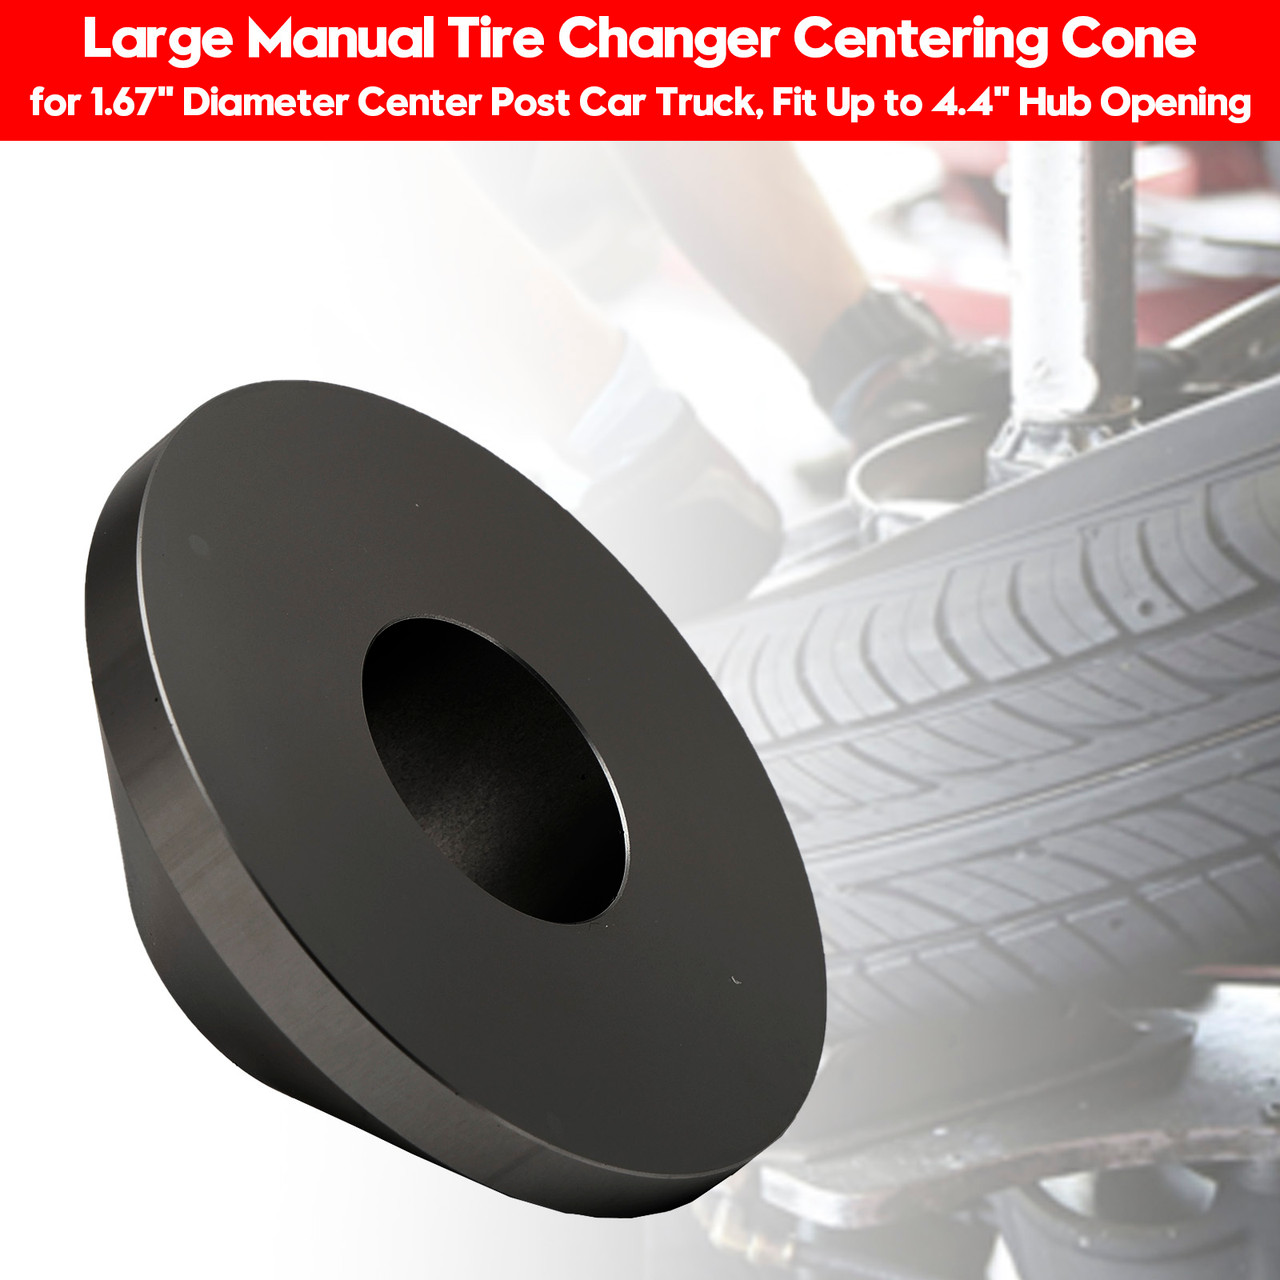 1.67" Harbor Freight Large Manual Tire Changer Centering Cone